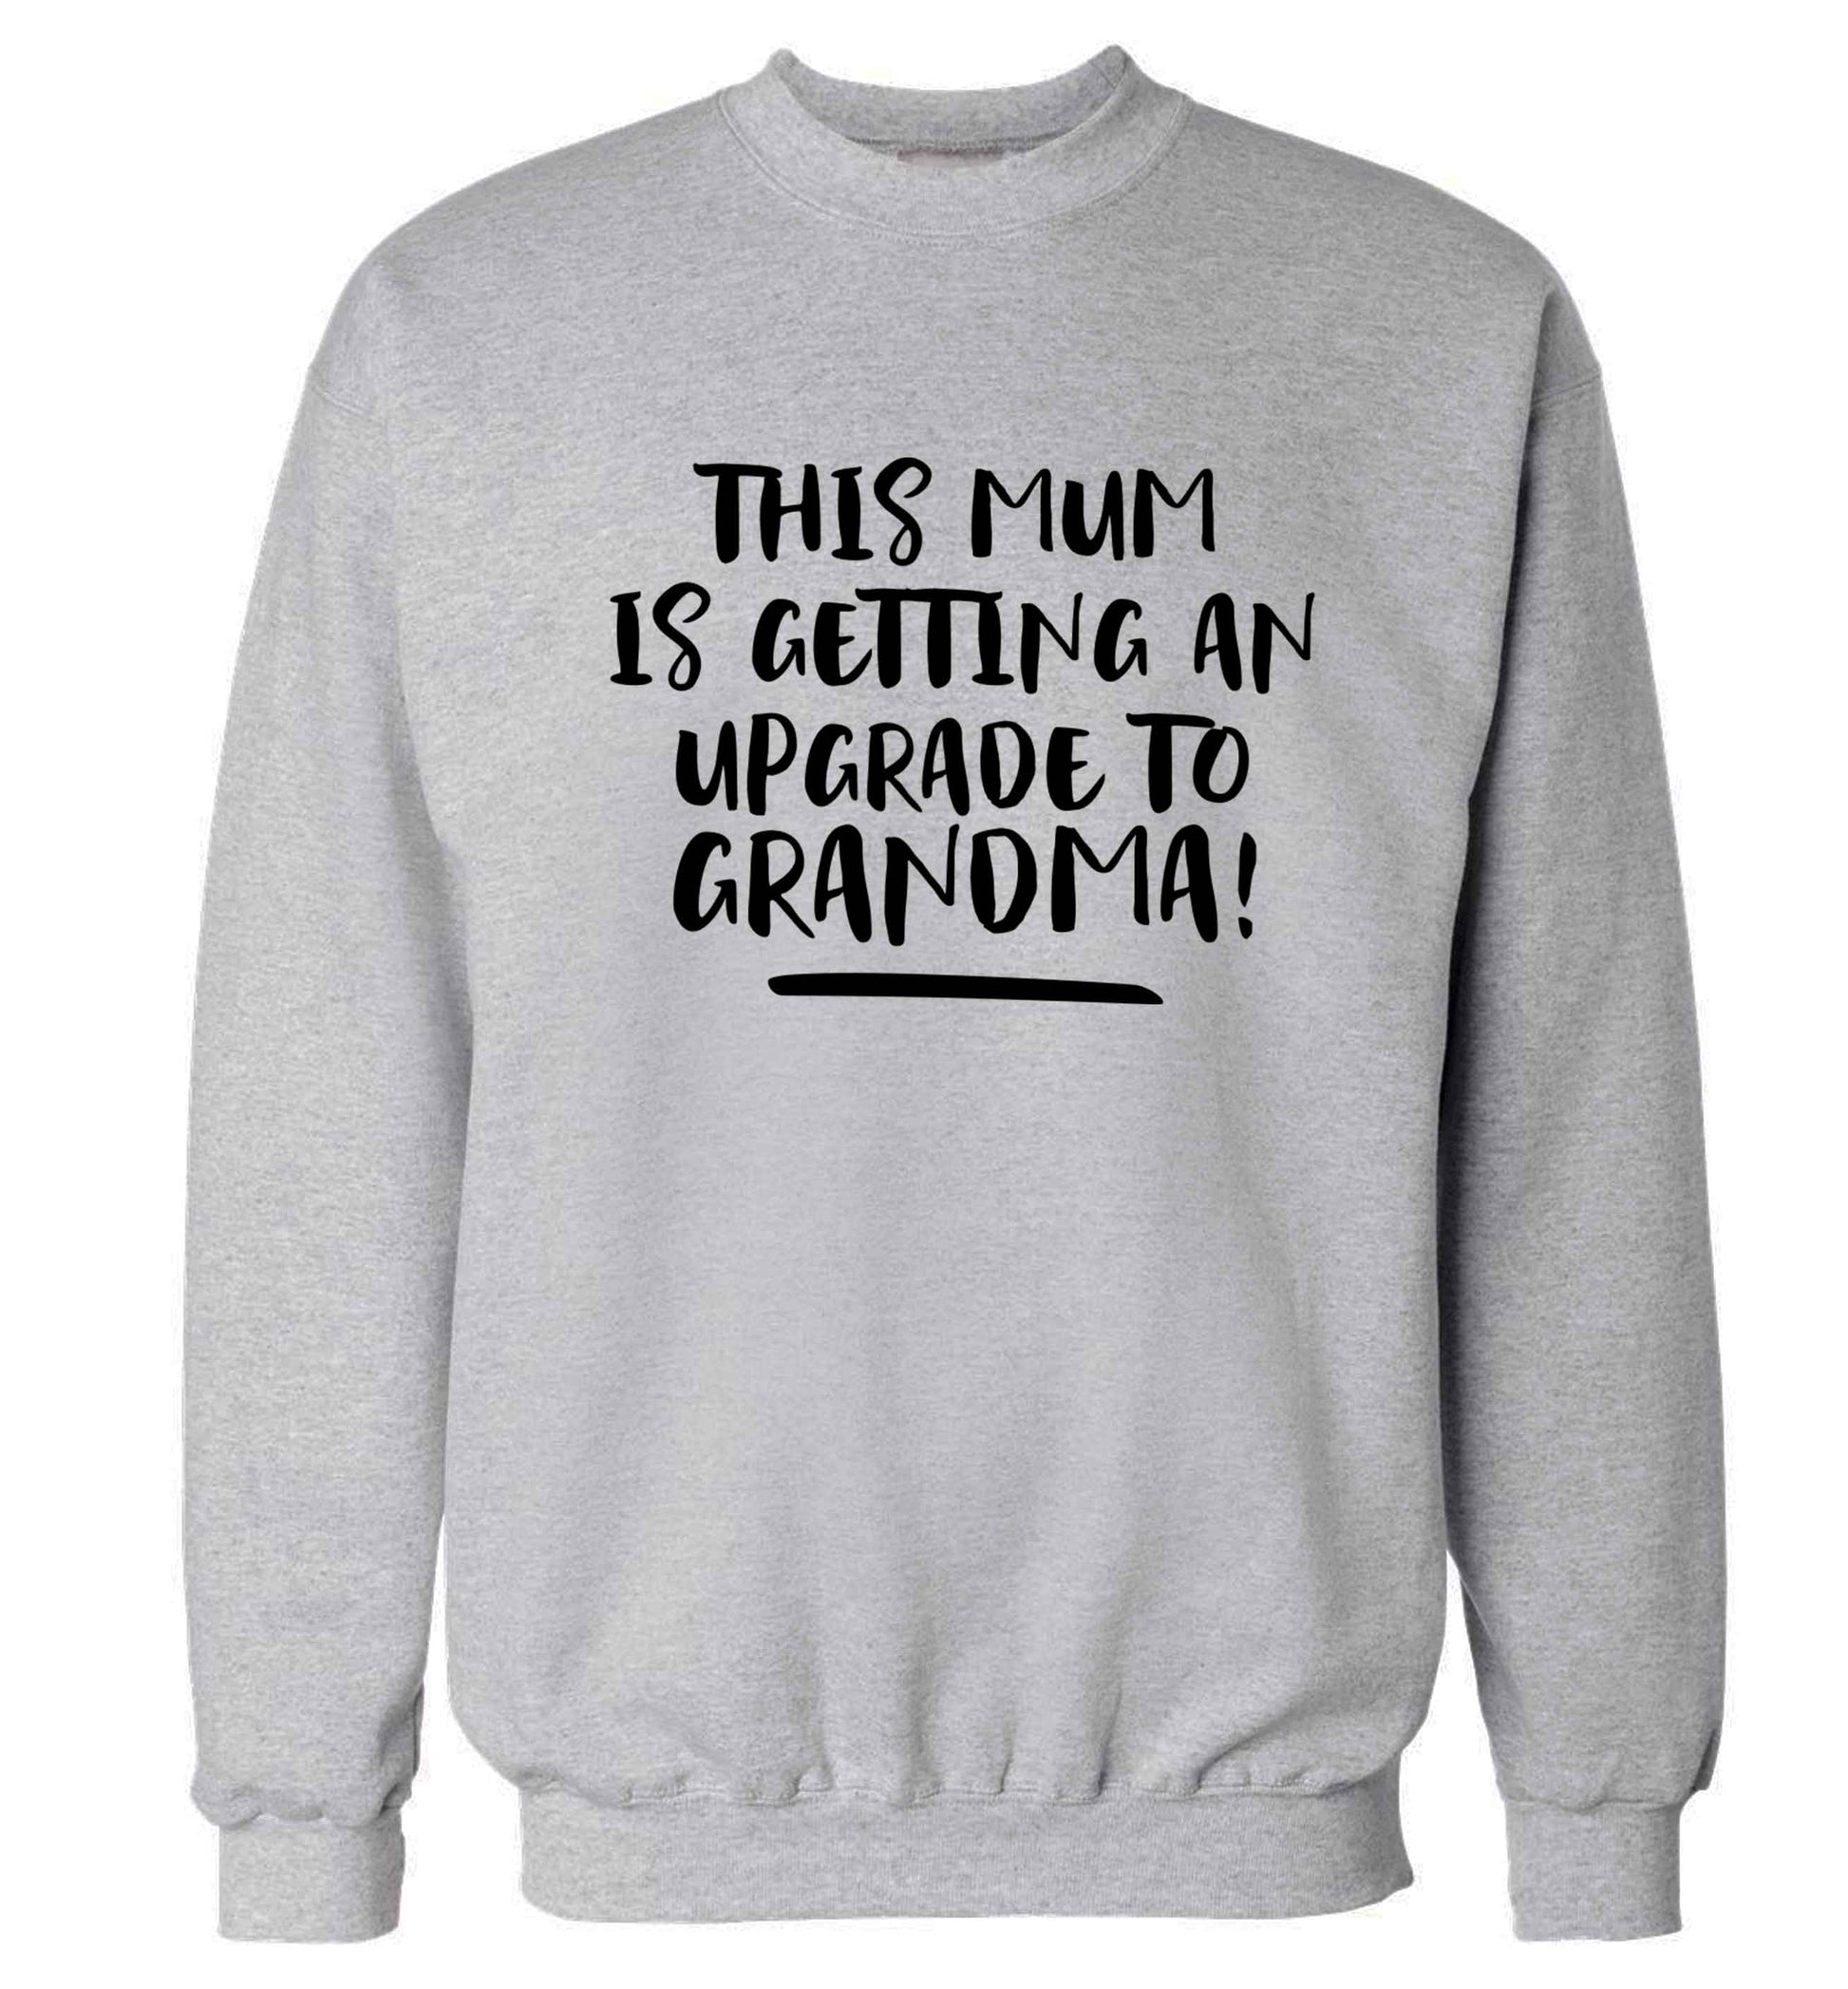 This mum is getting an upgrade to grandma! Adult's unisex grey Sweater 2XL